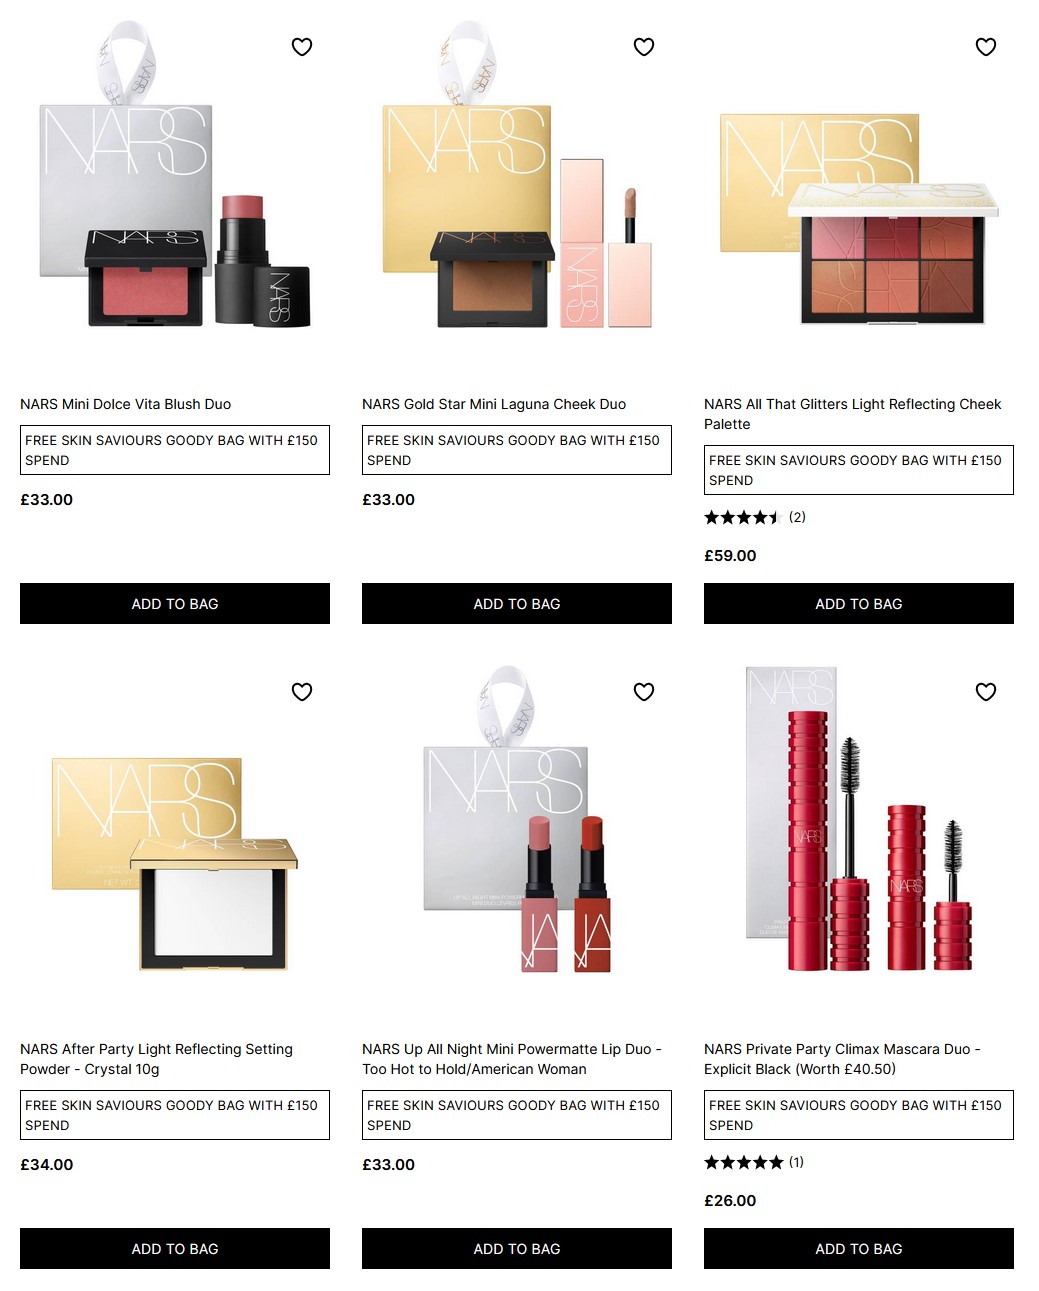 20% off NARS at Cult Beauty + free Kiss The Stars Matte Lip Duo (worth £37) when you spend £50